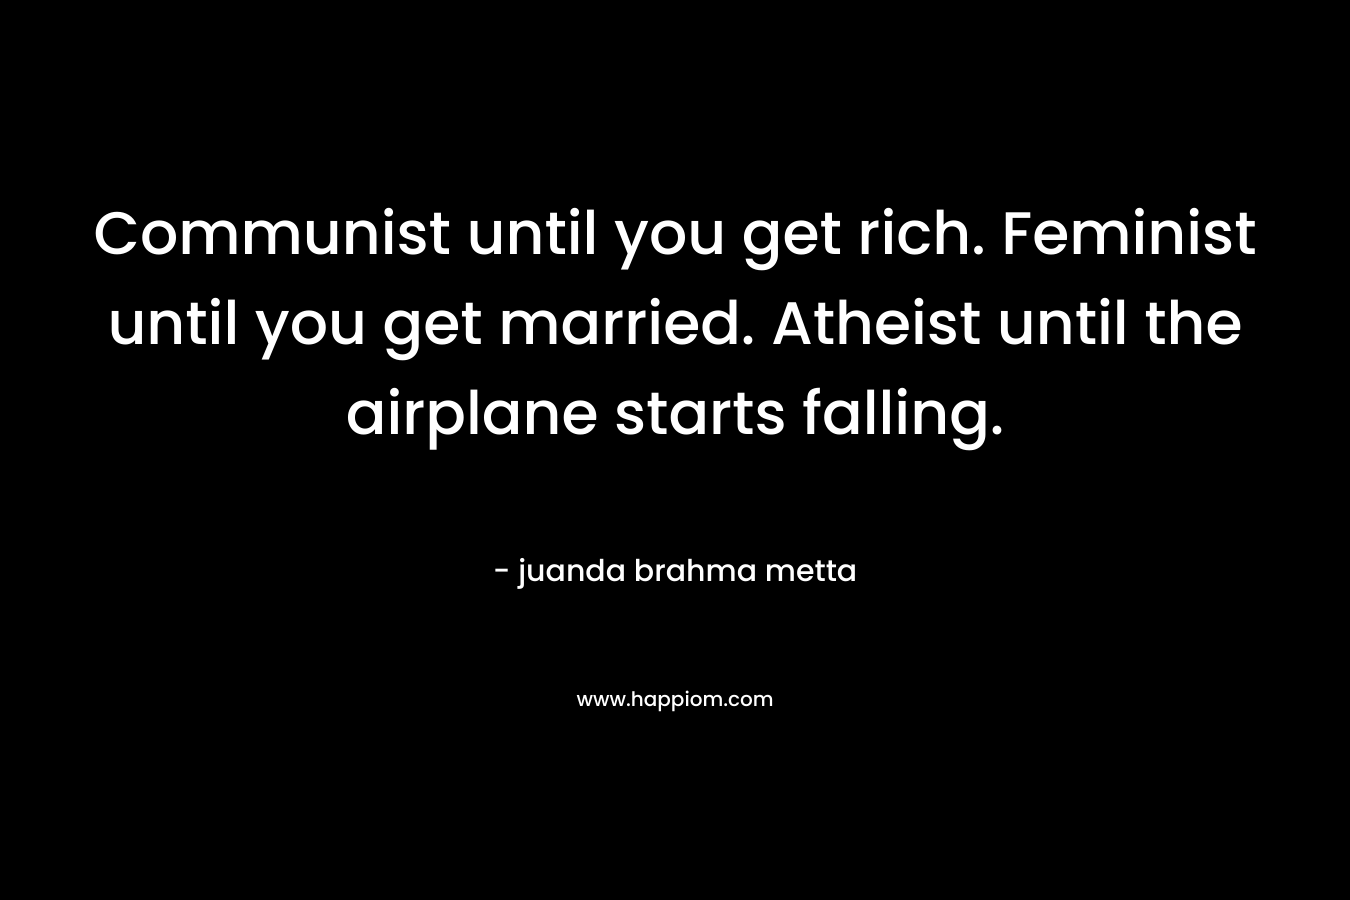 Communist until you get rich. Feminist until you get married. Atheist until the airplane starts falling.